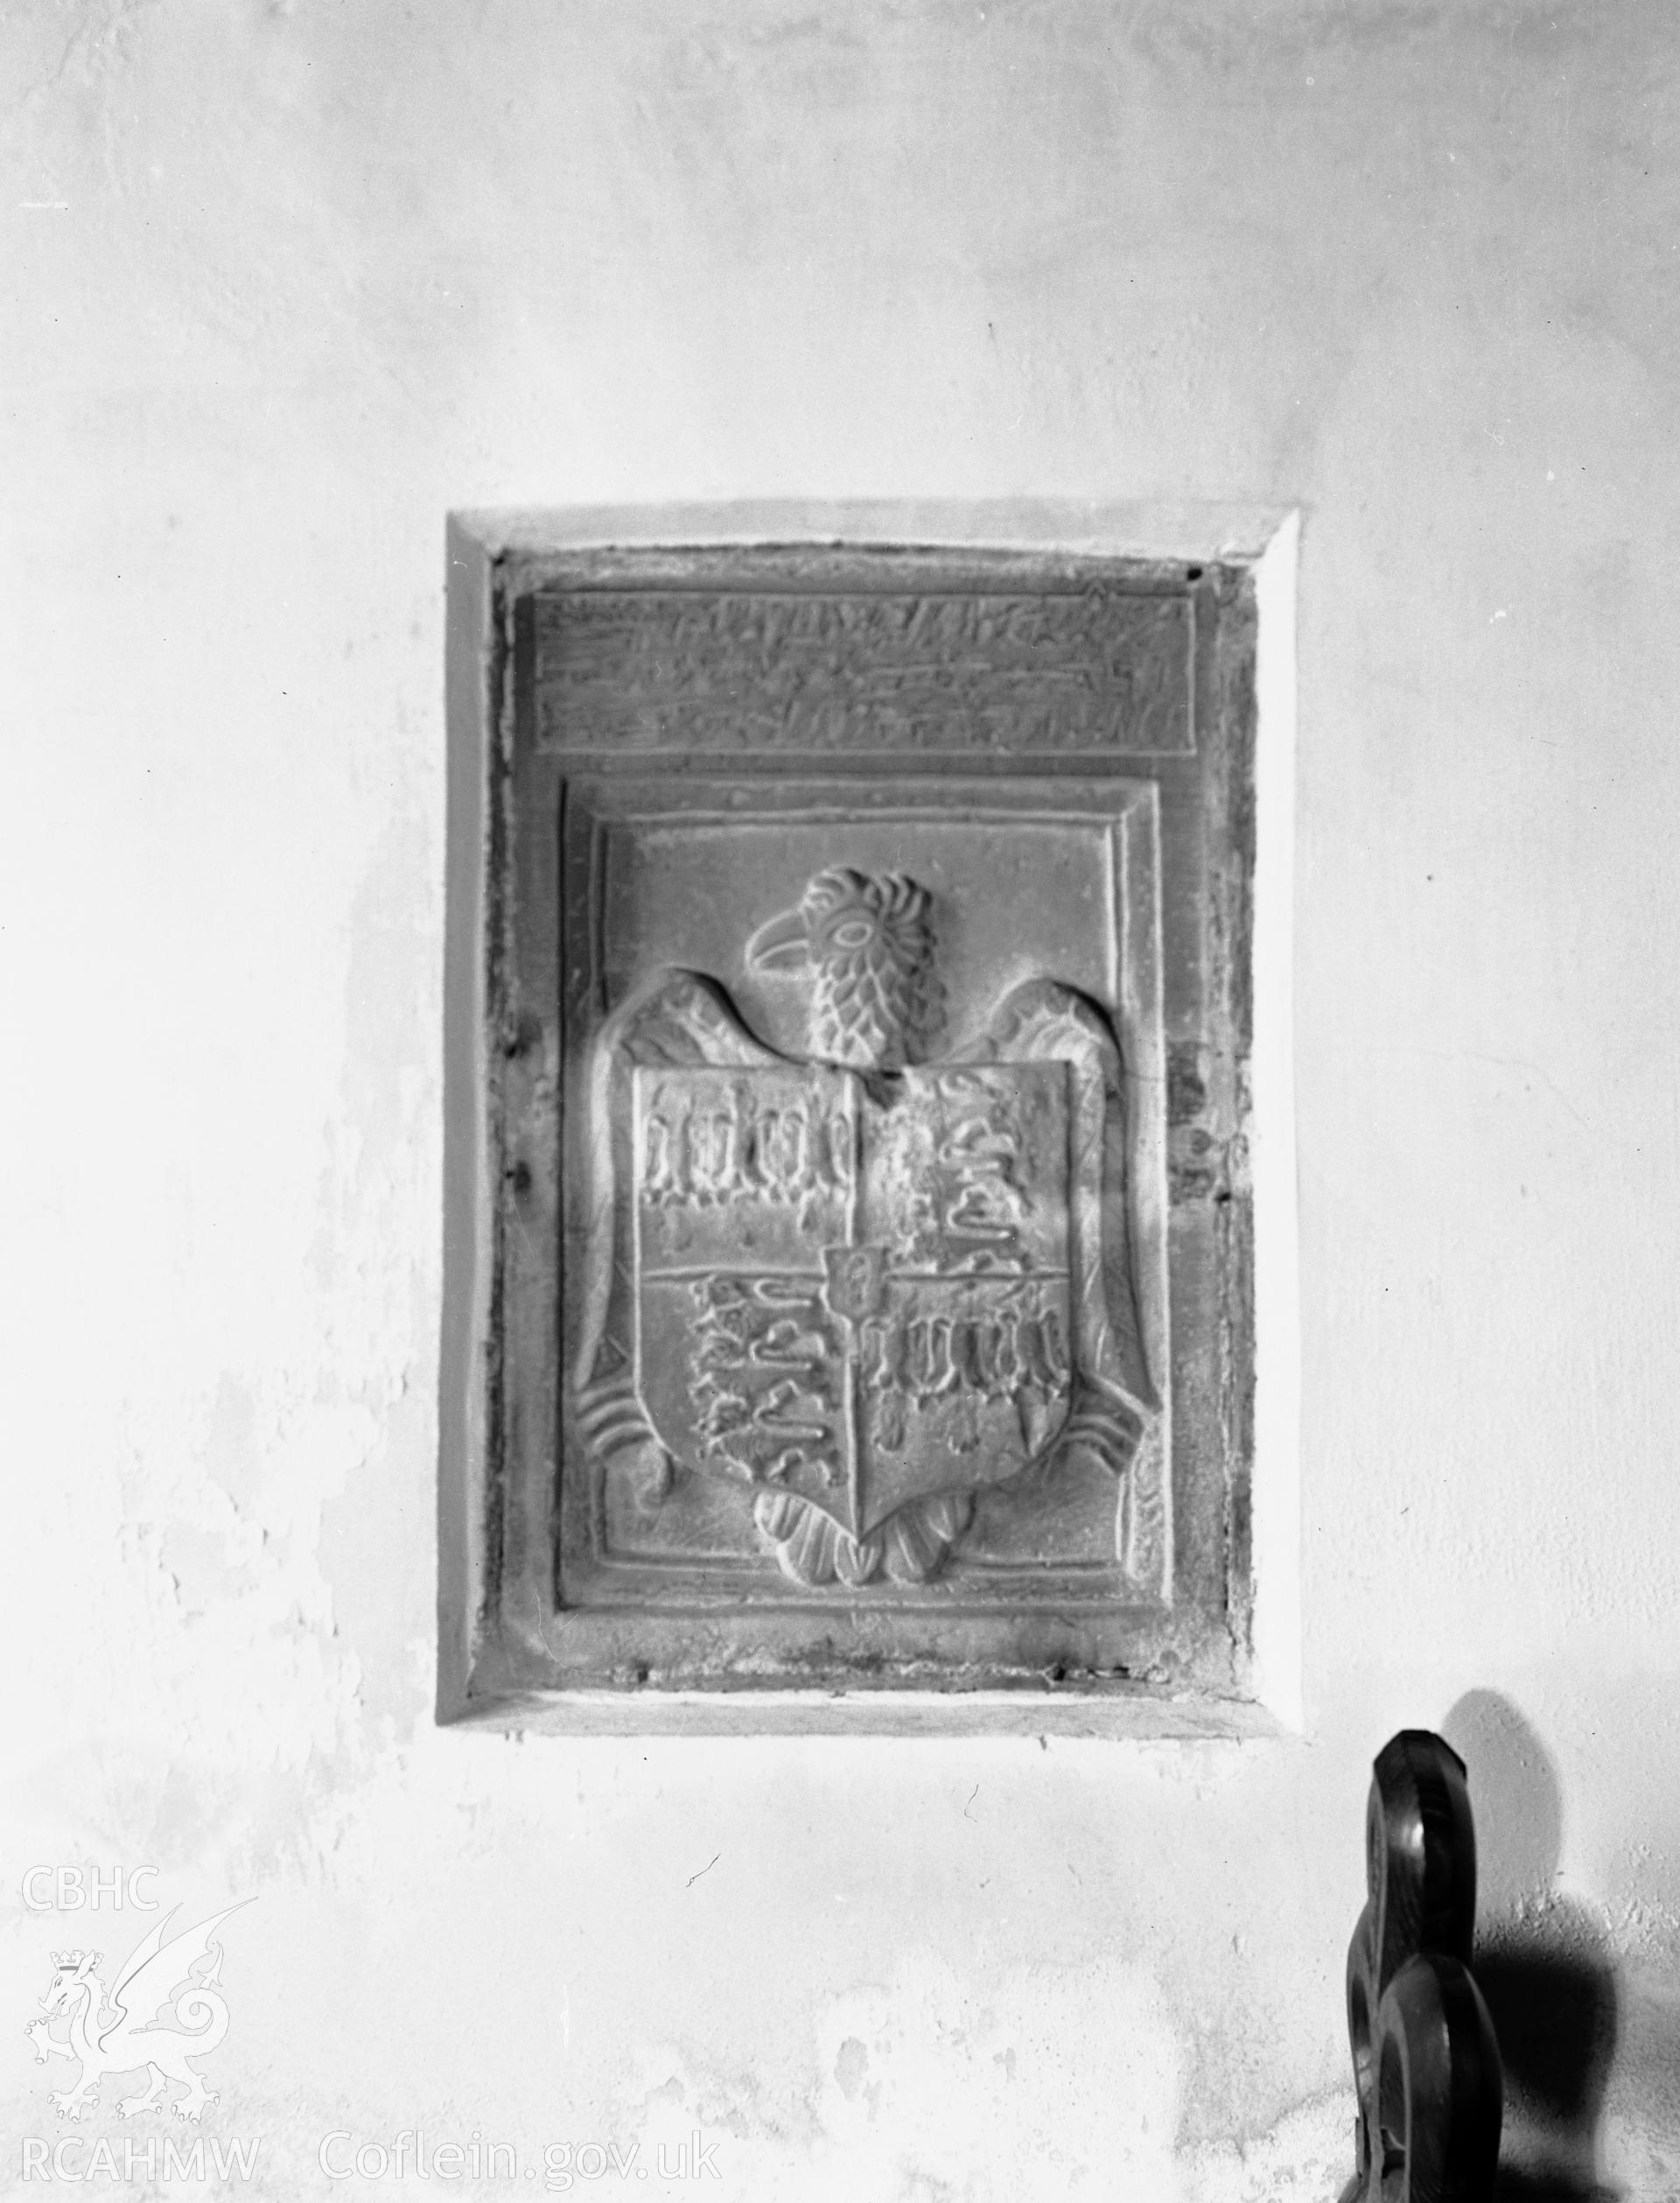 Interior view of St Mary's Church showing memorial, taken 10.05.1956.